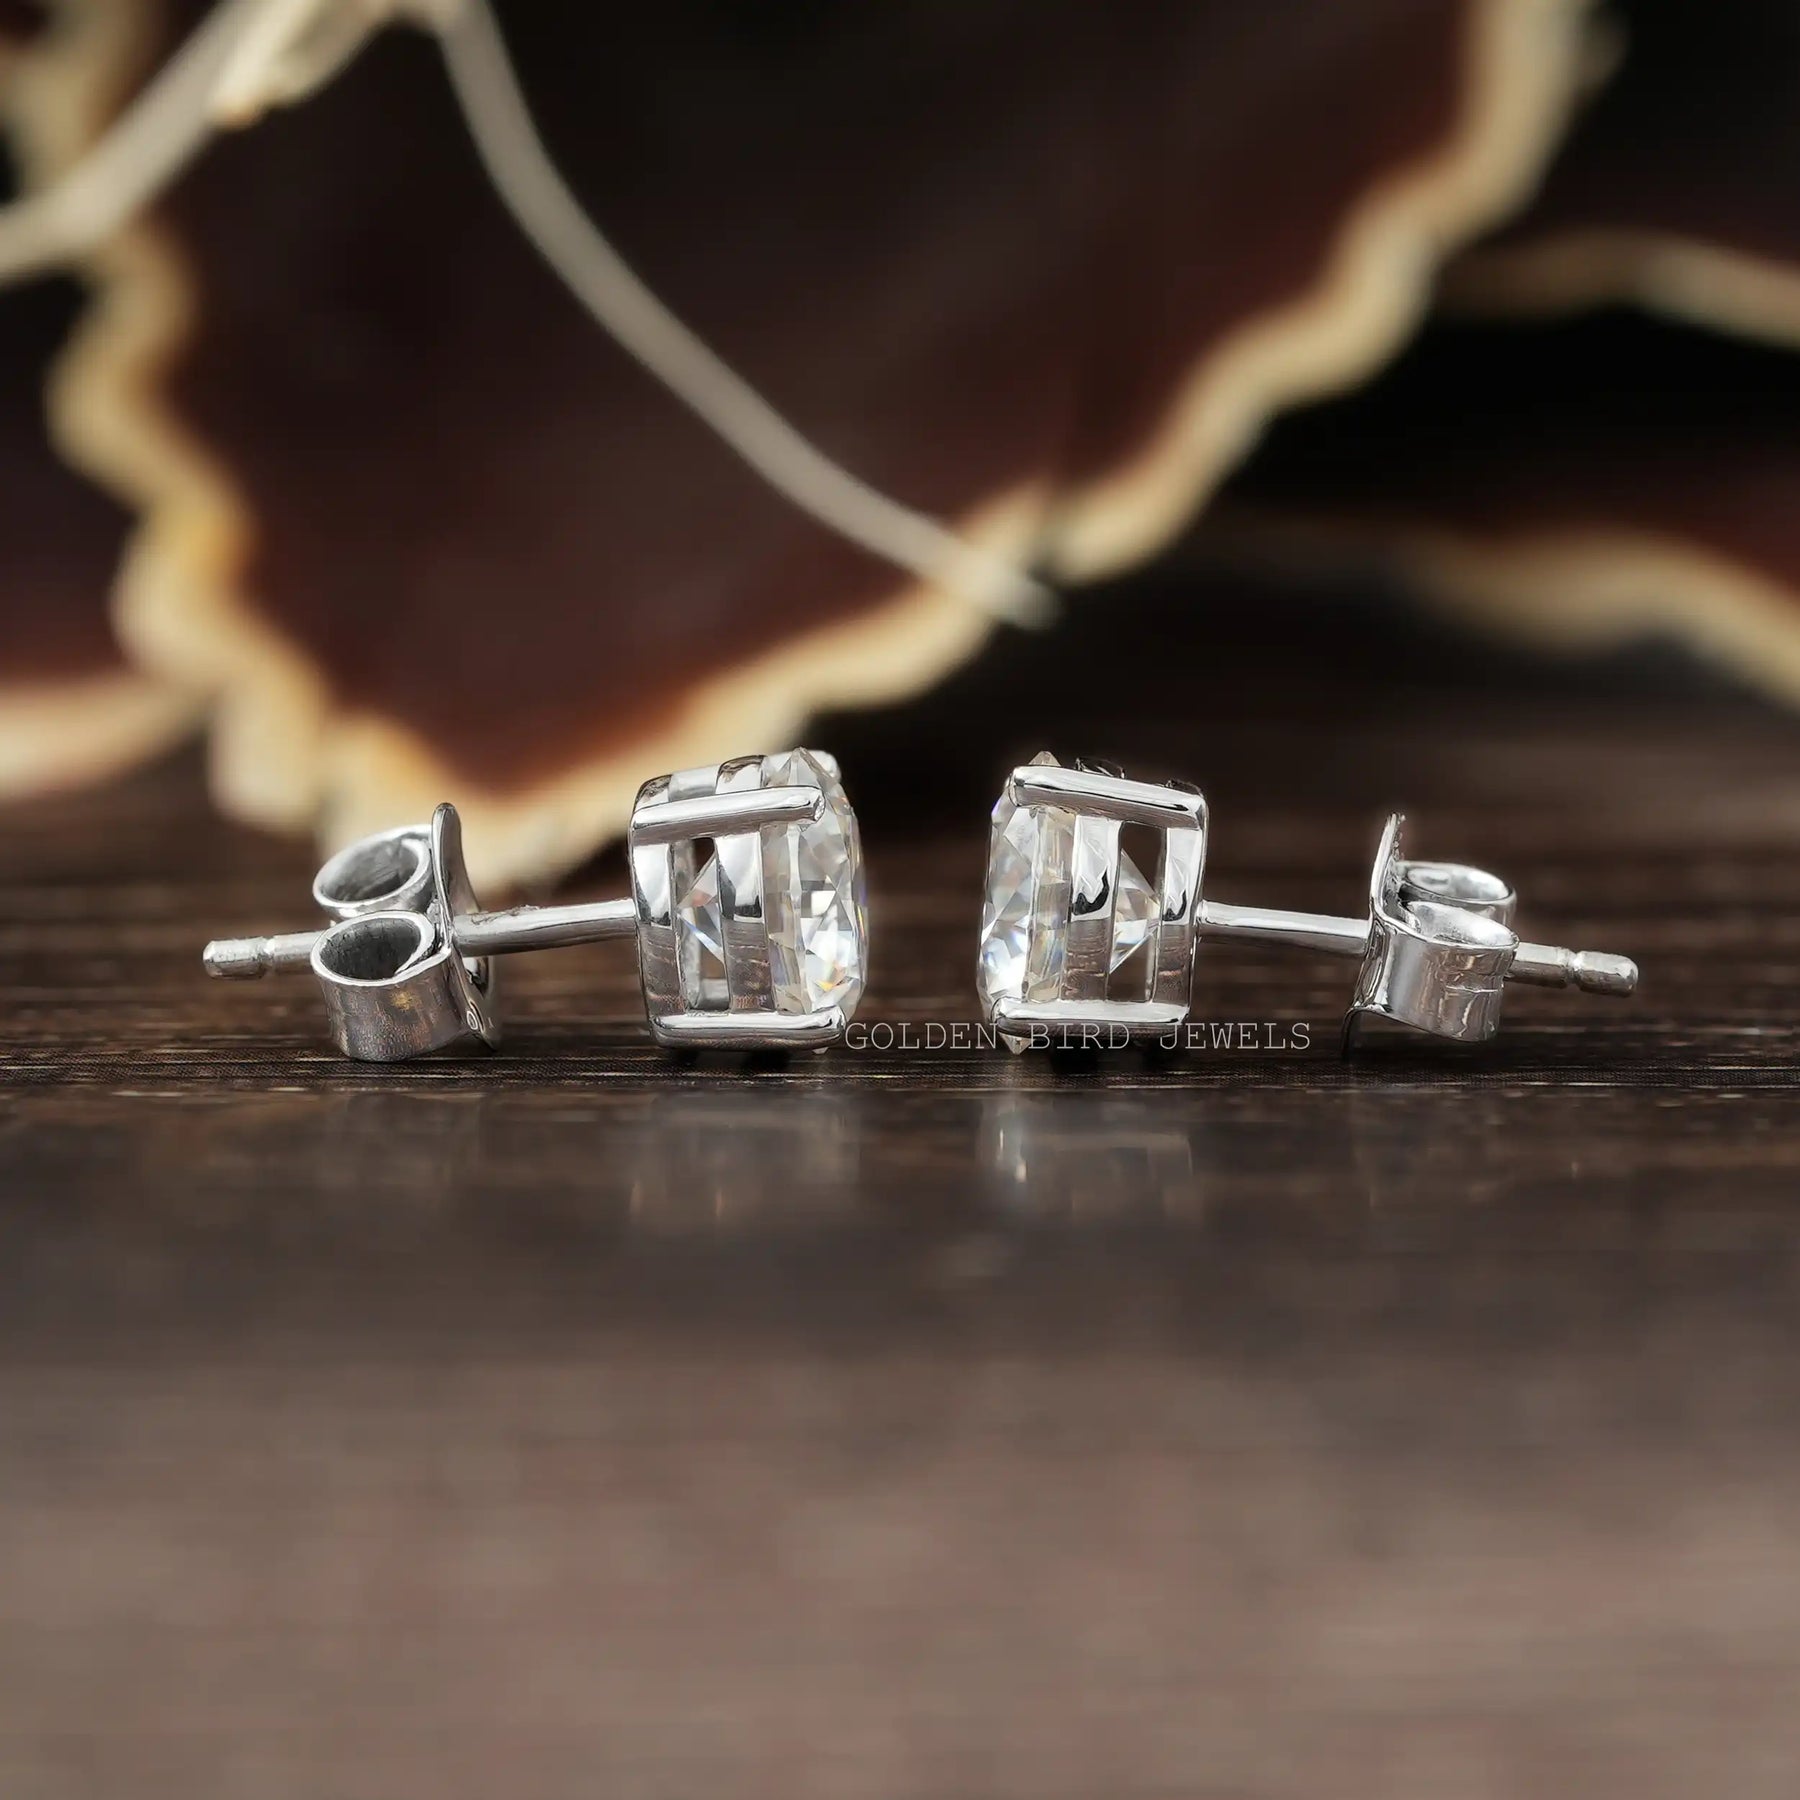 [Round Cut Solitaire Moissanite Stud Earrings Crafted With White Gold]-[Golden Bird Jewels] 